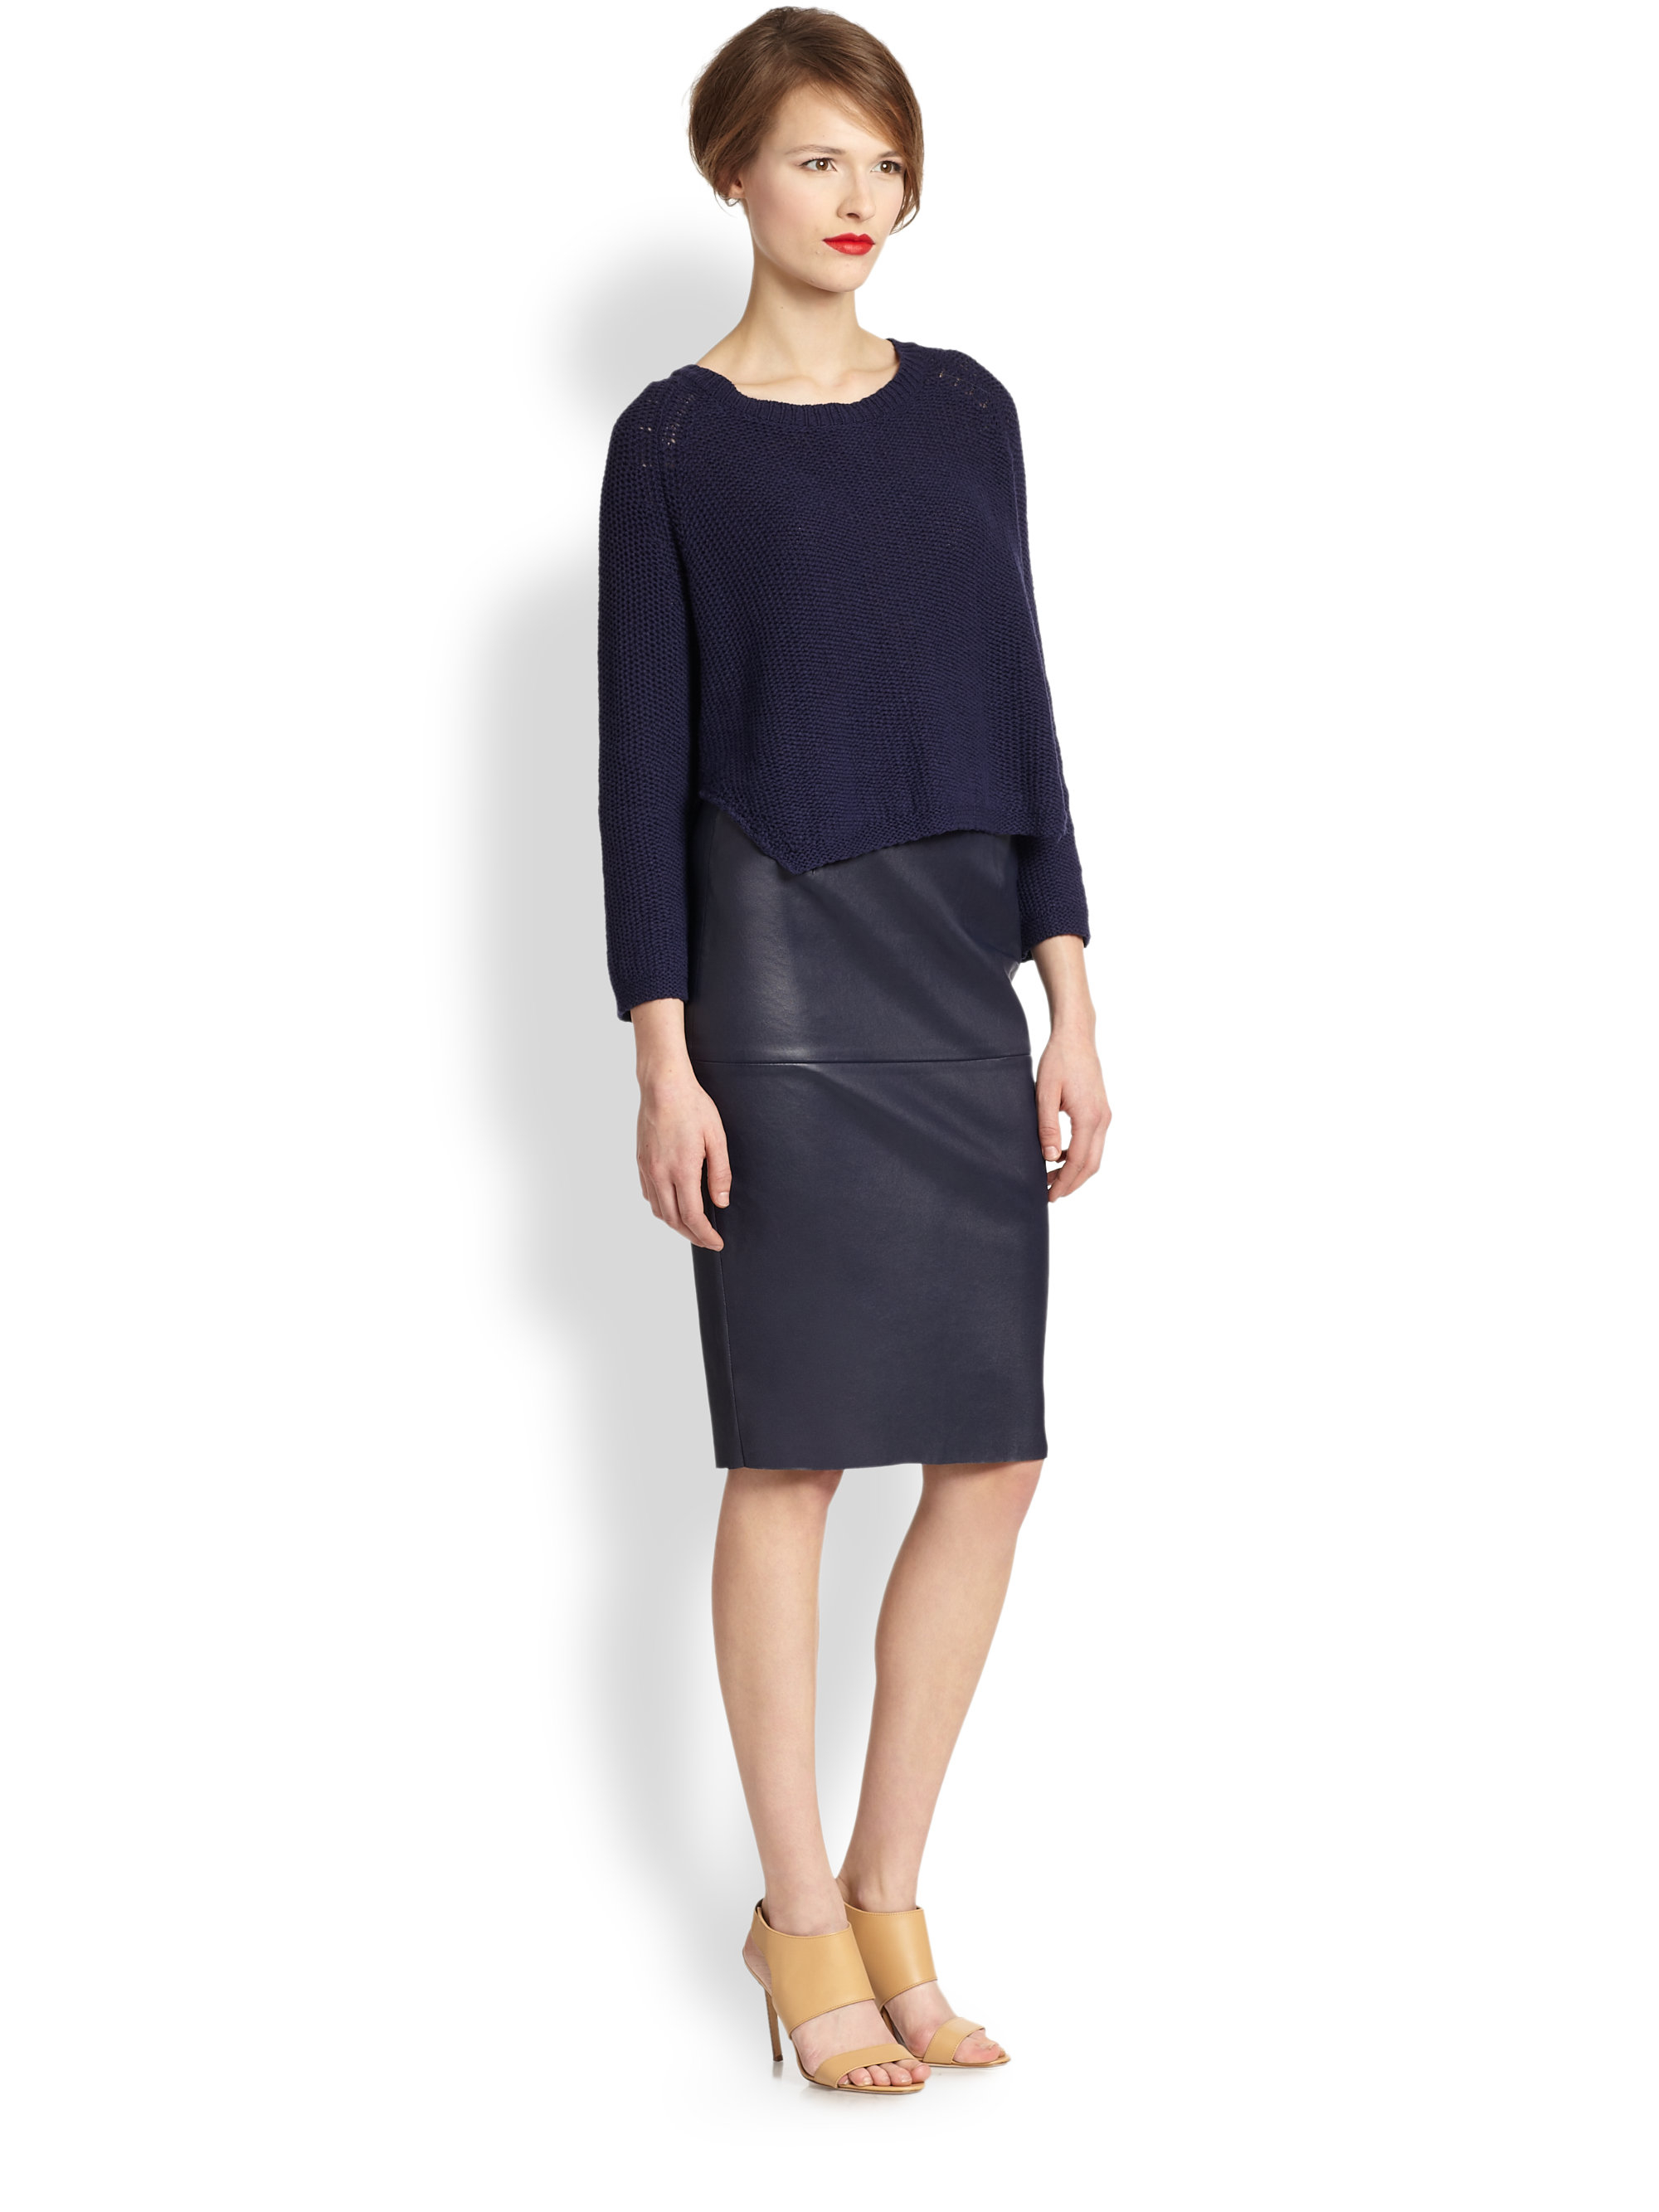 Lyst - By Malene Birger Dolila Leather Skirt in Blue